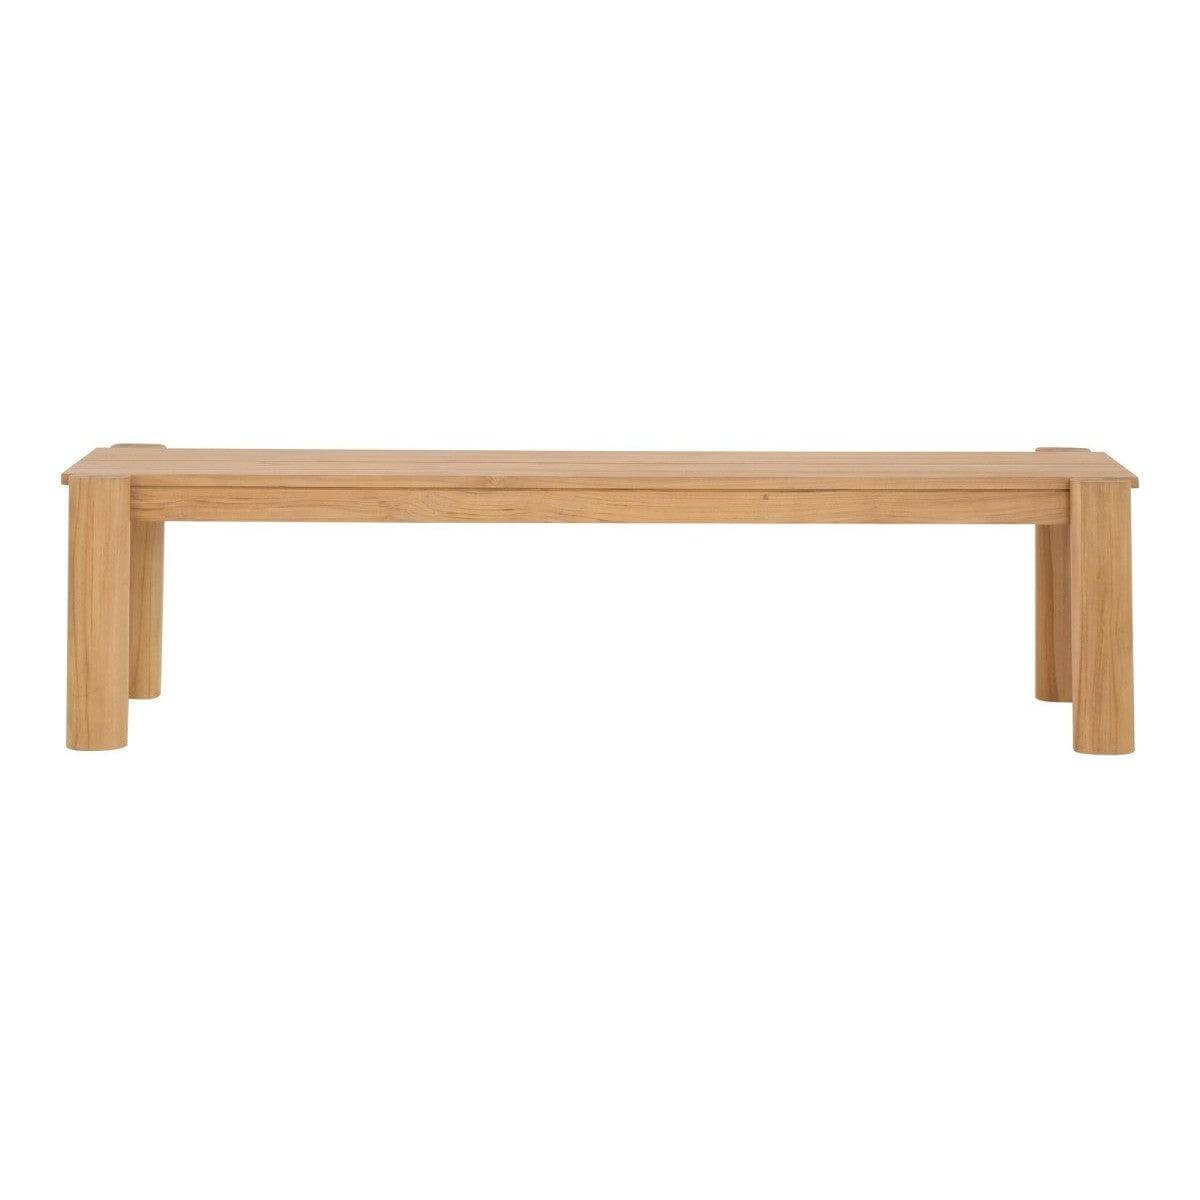 Moe's Home 71" Tempo Dining Bench - CV-1021-24 - Moe's Home - $1050.00